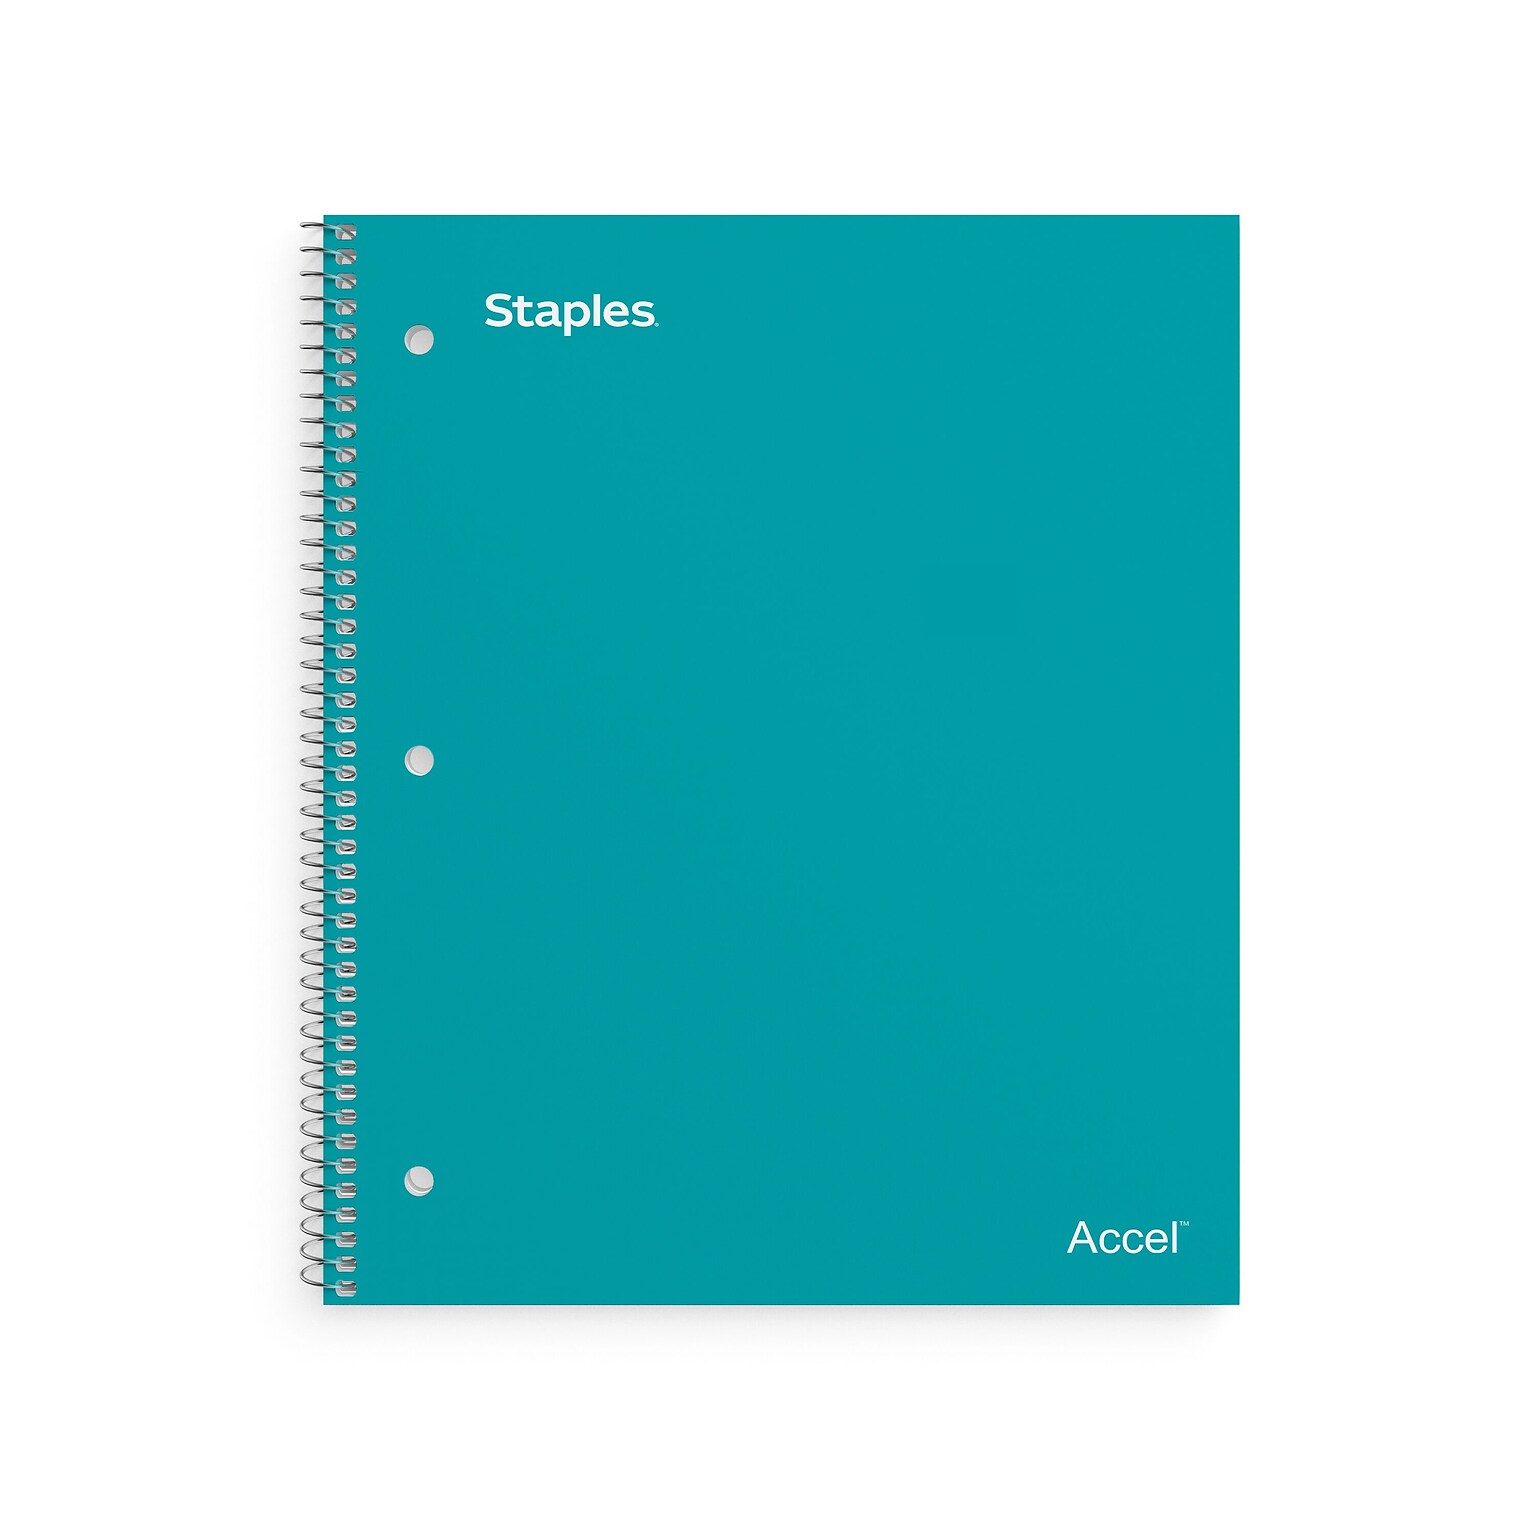 Staples Premium 3-Subject Notebook, 8.5 x 11, College Ruled, 150 Sheets, Teal (ST58316)